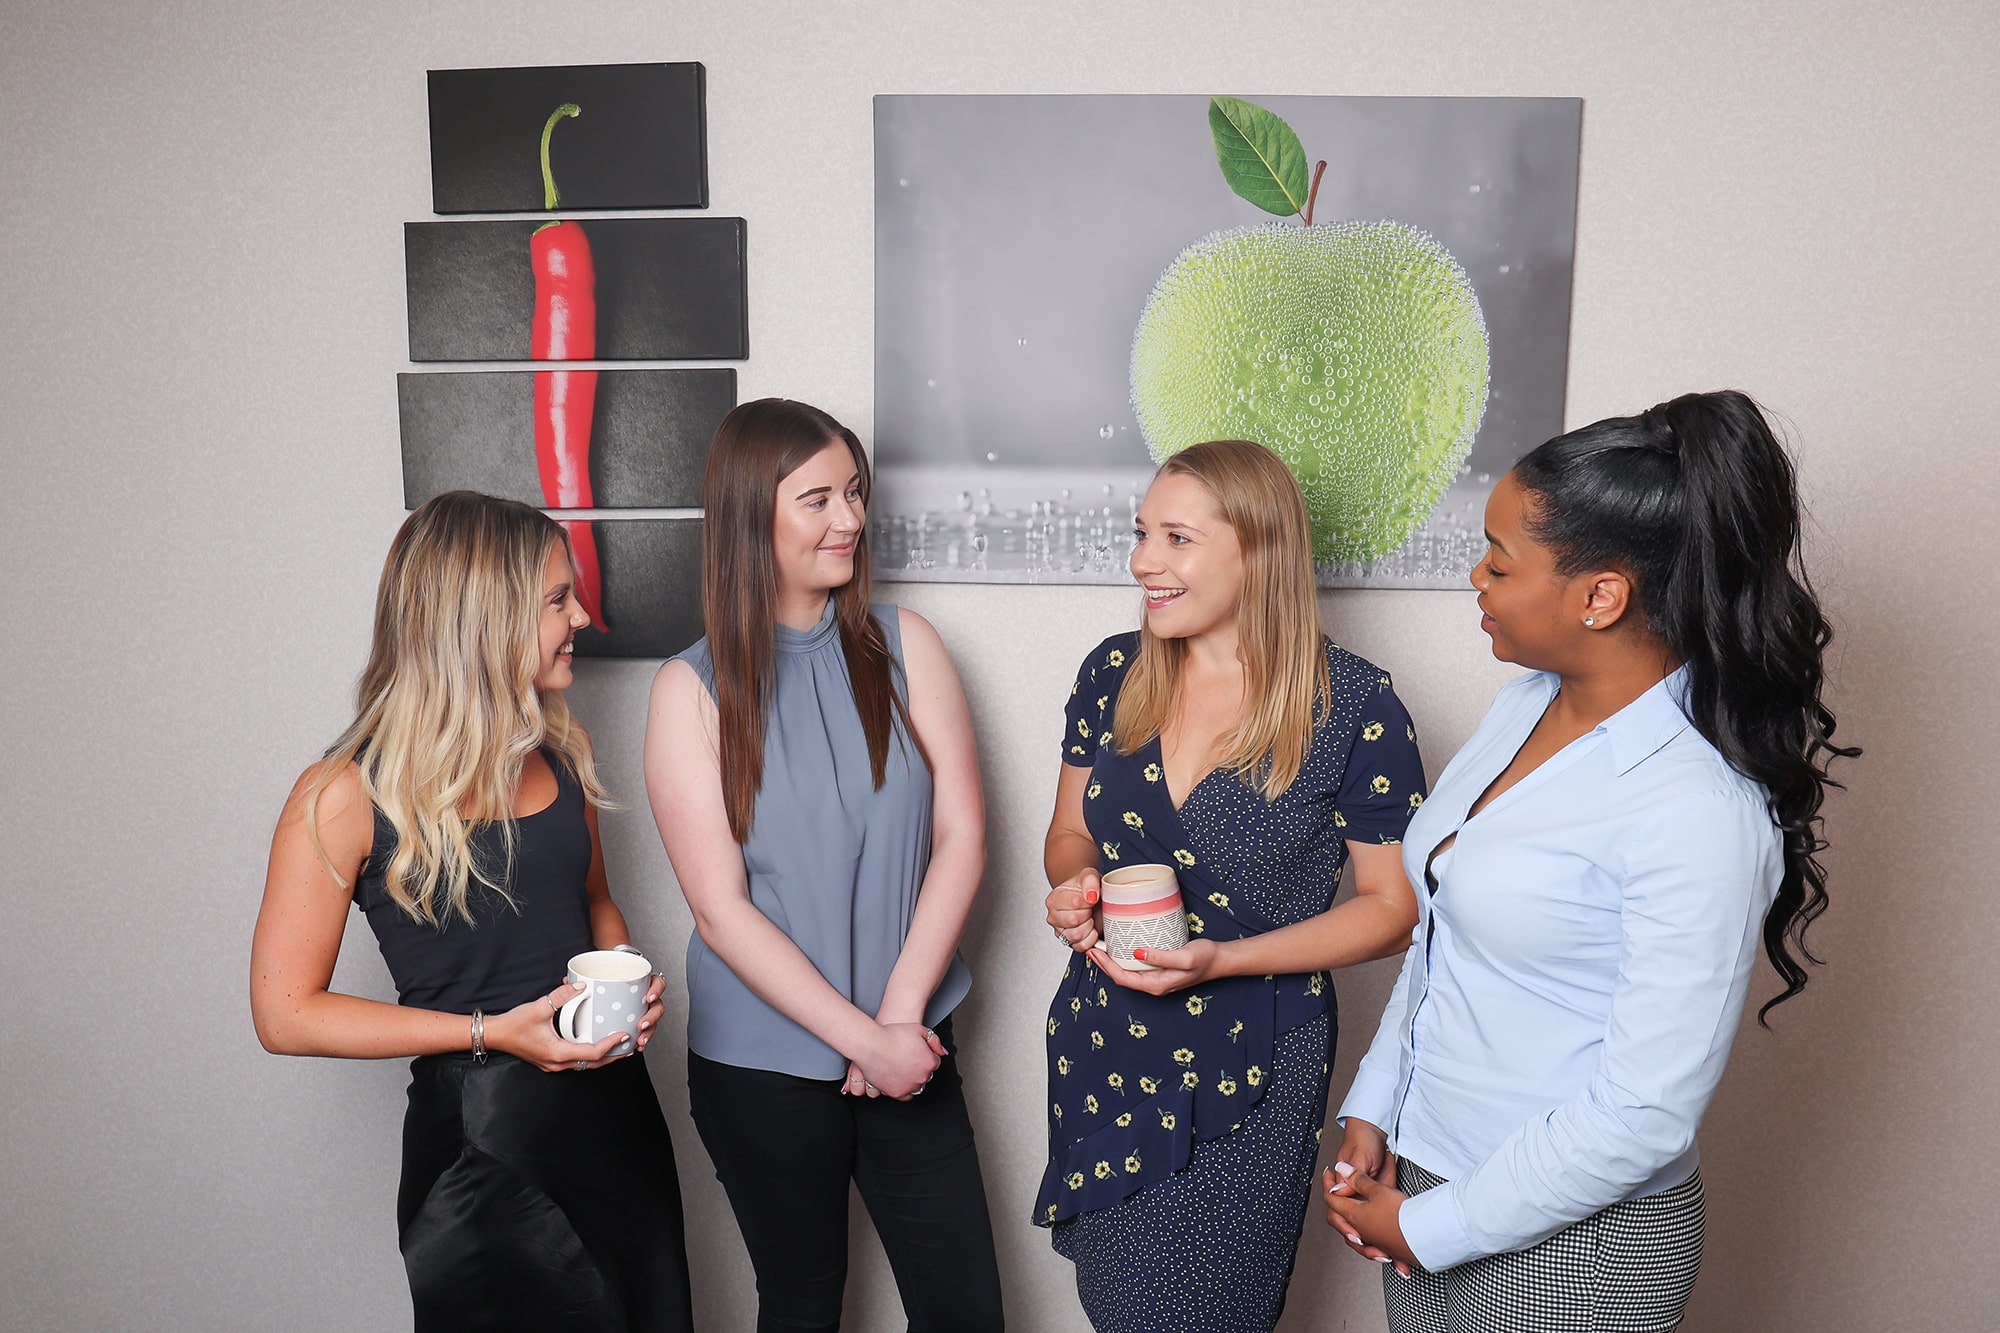 Account Team Grows as chilliapple Takes on More Clients